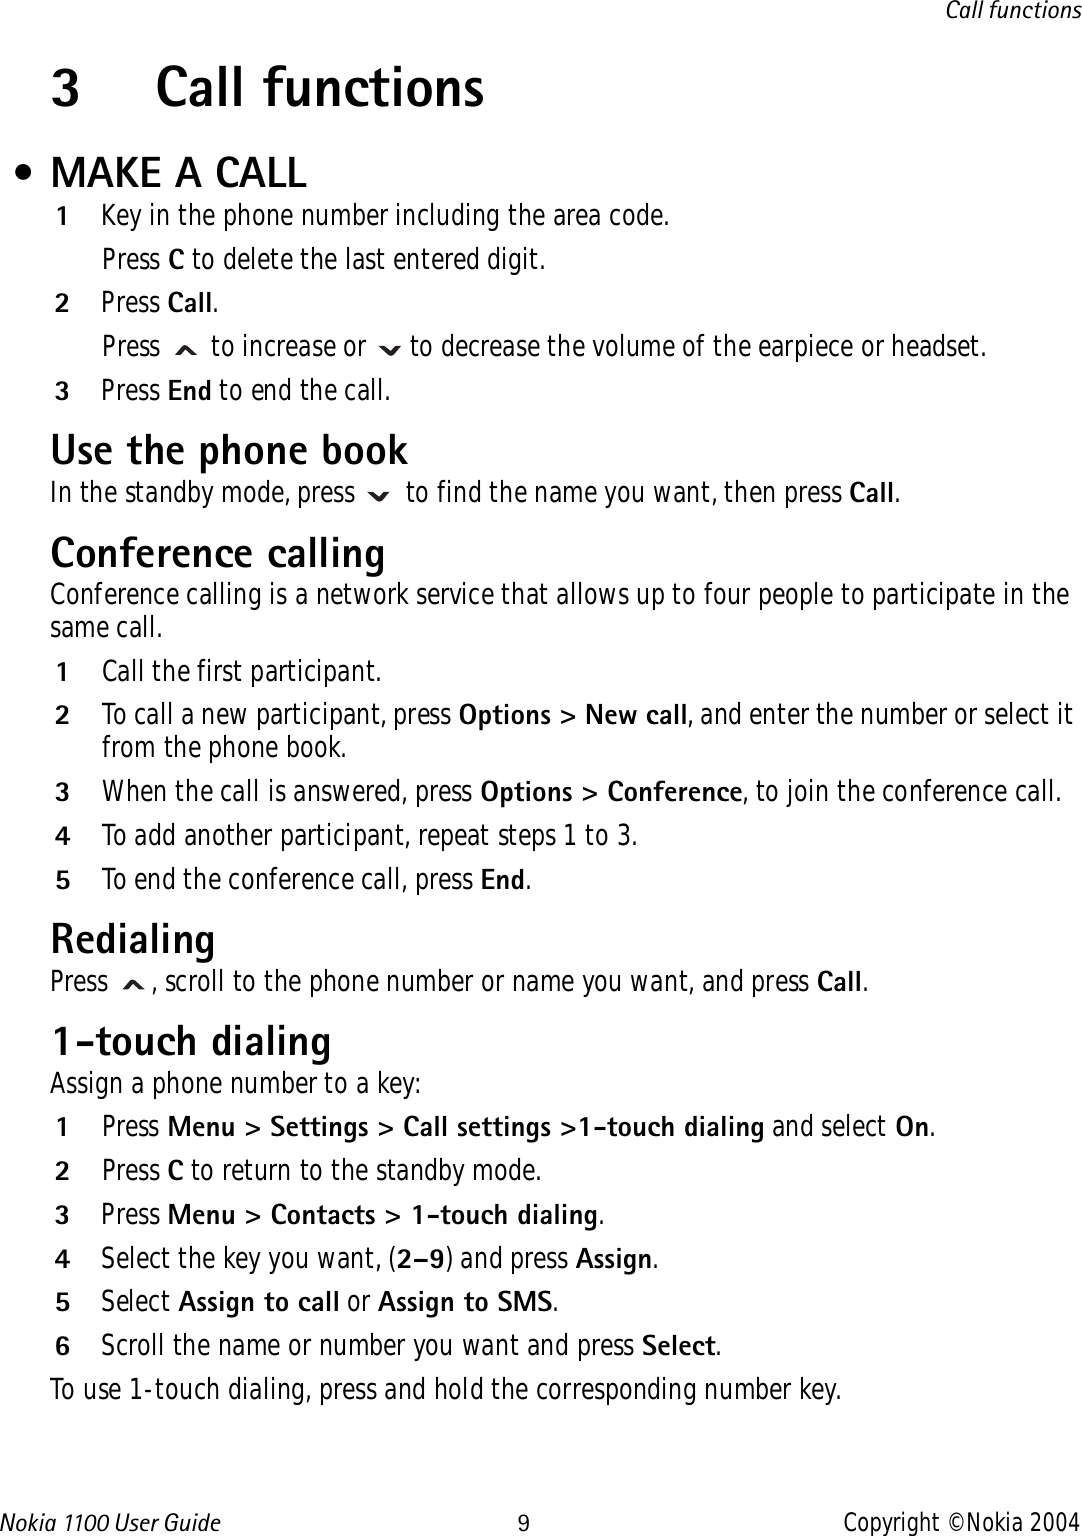 Nokia 110 0  User Guide 9Copyright © Nokia 2004Call functions3 Call functions • MAKE A CALL1Key in the phone number including the area code. Press C to delete the last entered digit.2Press Call. Press   to increase or   to decrease the volume of the earpiece or headset.3Press End to end the call.Use the phone bookIn the standby mode, press   to find the name you want, then press Call.Conference callingConference calling is a network service that allows up to four people to participate in the same call.1Call the first participant.2To call a new participant, press Options &gt; New call, and enter the number or select it from the phone book.3When the call is answered, press Options &gt; Conference, to join the conference call.4To add another participant, repeat steps 1 to 3.5To end the conference call, press End.RedialingPress  , scroll to the phone number or name you want, and press Call.1-touch dialingAssign a phone number to a key:1Press Menu &gt; Settings &gt; Call settings &gt;1-touch dialing and select On.2Press C to return to the standby mode.3Press Menu &gt; Contacts &gt; 1-touch dialing. 4Select the key you want, (2–9) and press Assign. 5Select Assign to call or Assign to SMS. 6Scroll the name or number you want and press Select.To use 1-touch dialing, press and hold the corresponding number key.